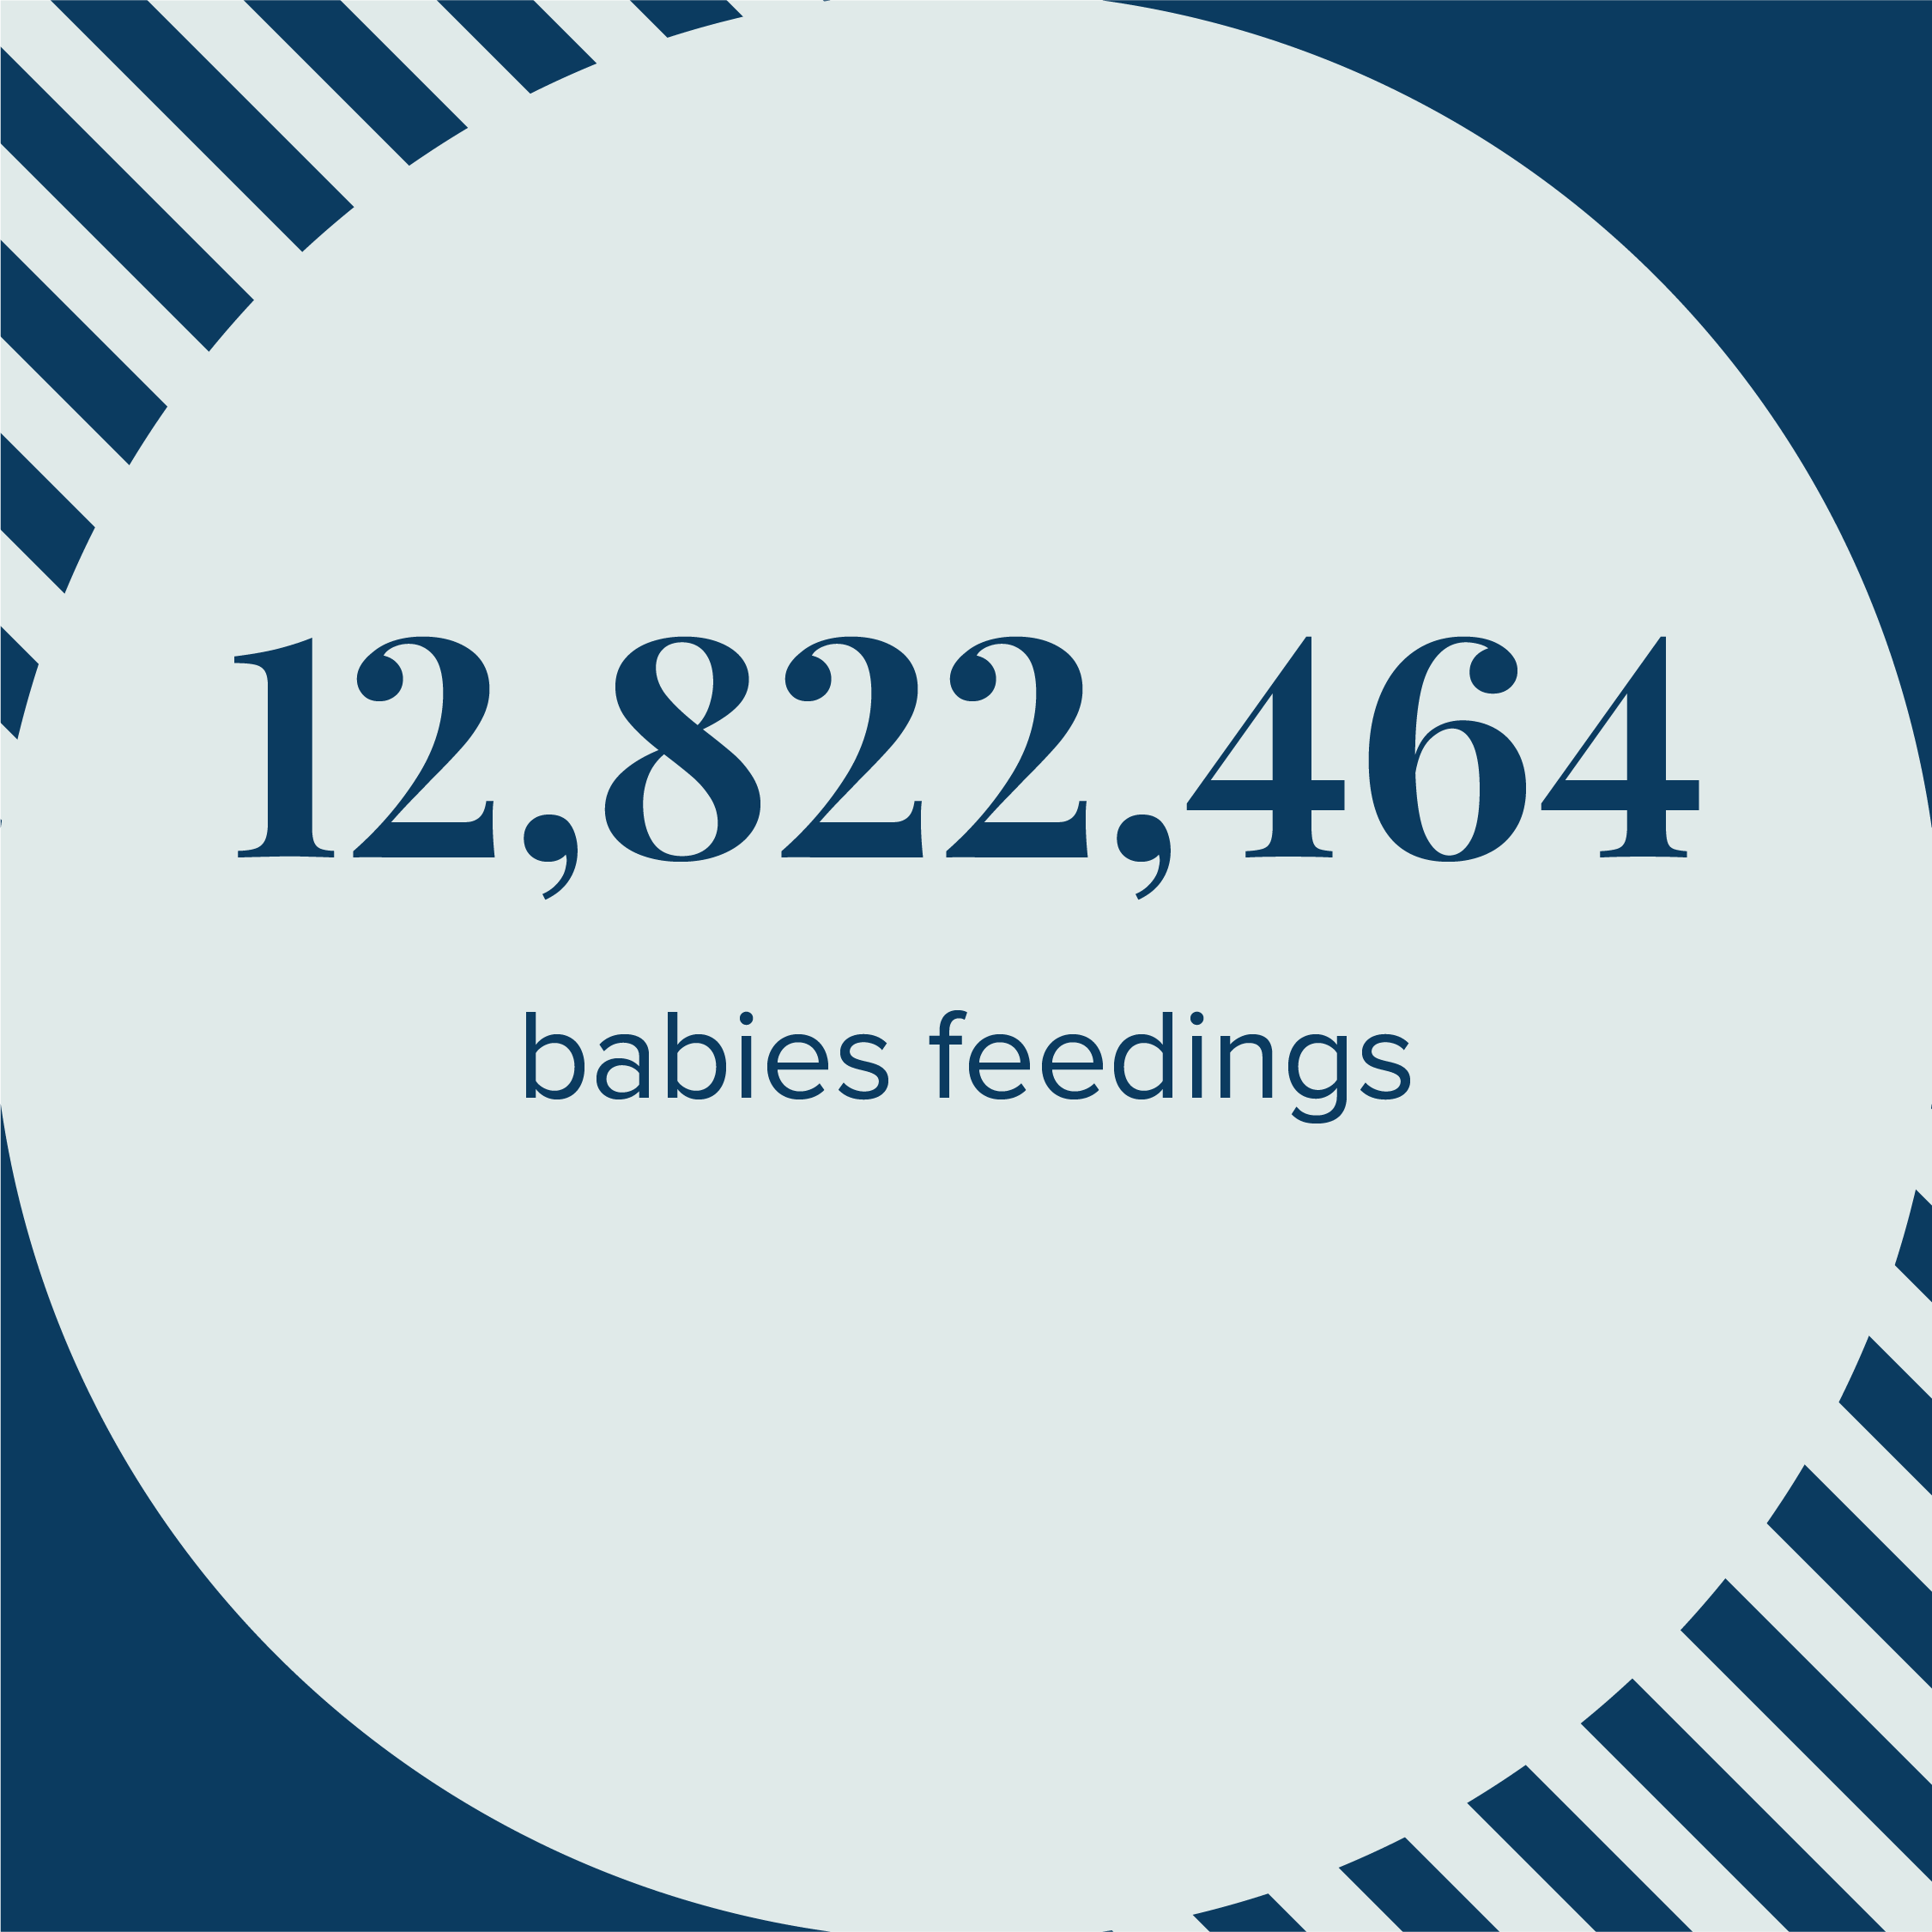 2,496,902 diapers changed